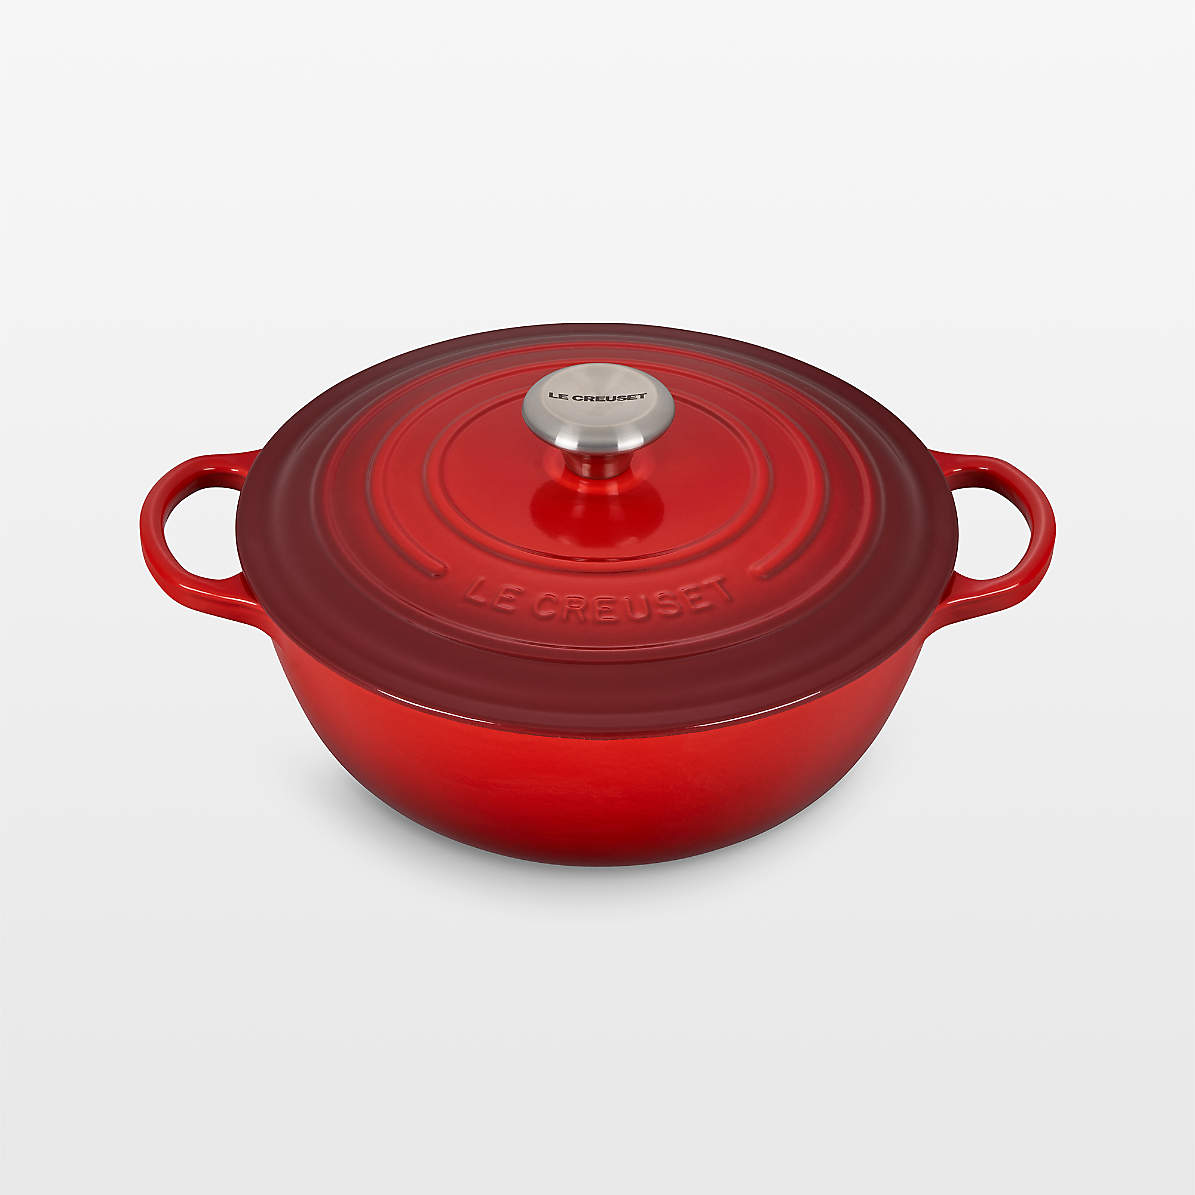 Le Creuset Enameled Steel Stock Pot with Lid Ombre Red